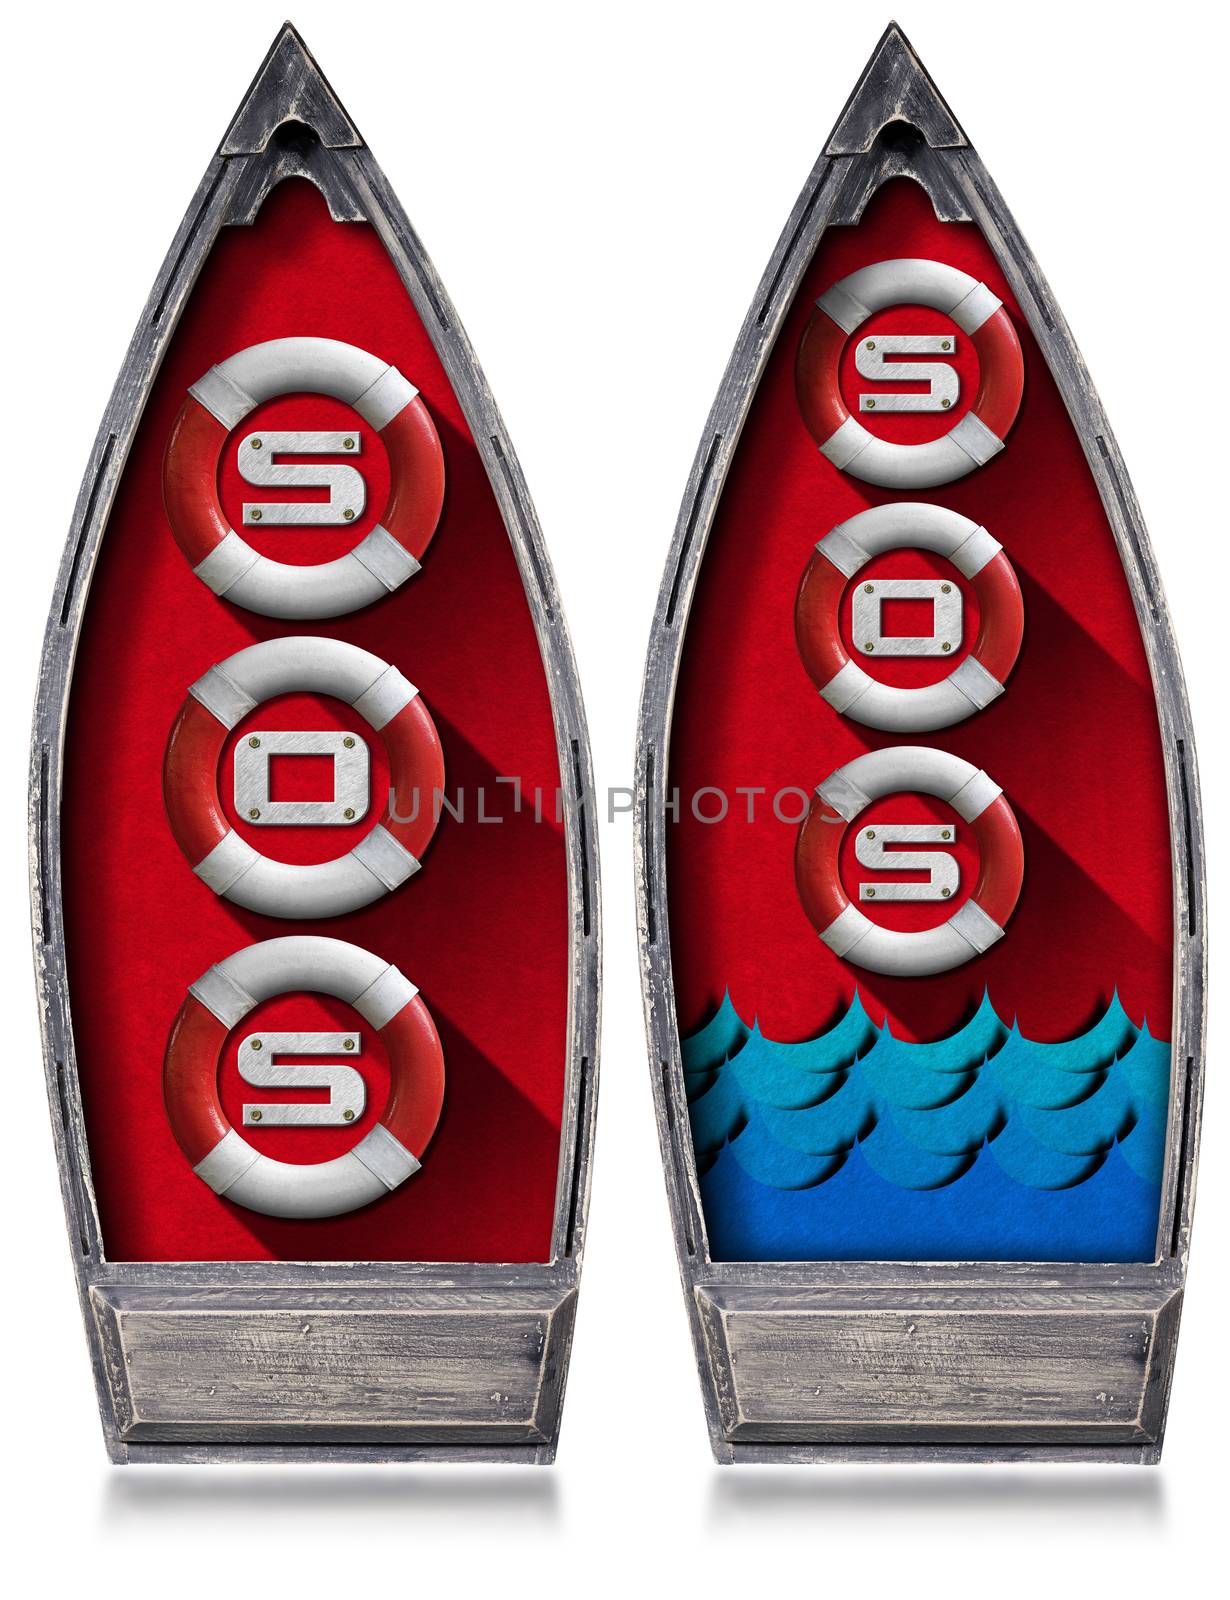 Rowboat with Lifebuoys and Text Sos by catalby